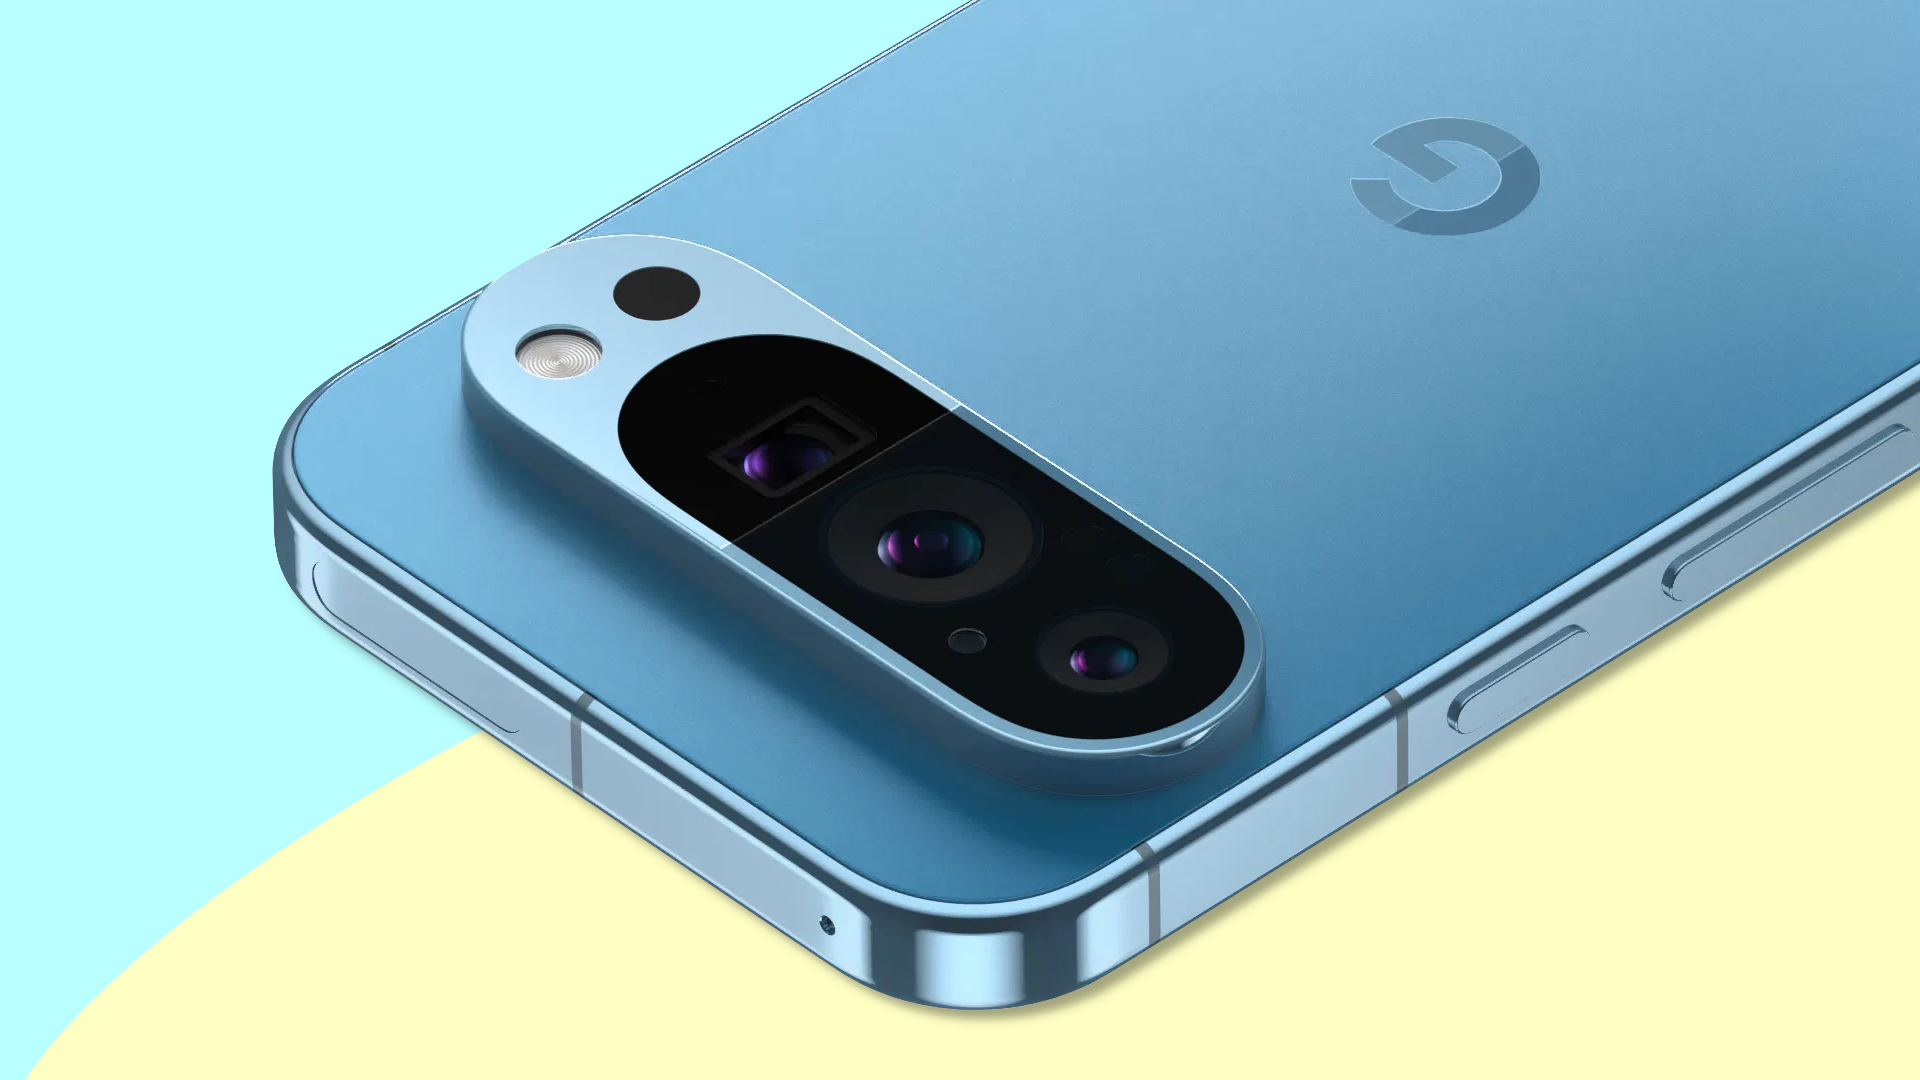 Renders of the Google Pixel 9 Android smartphone based on leaked information